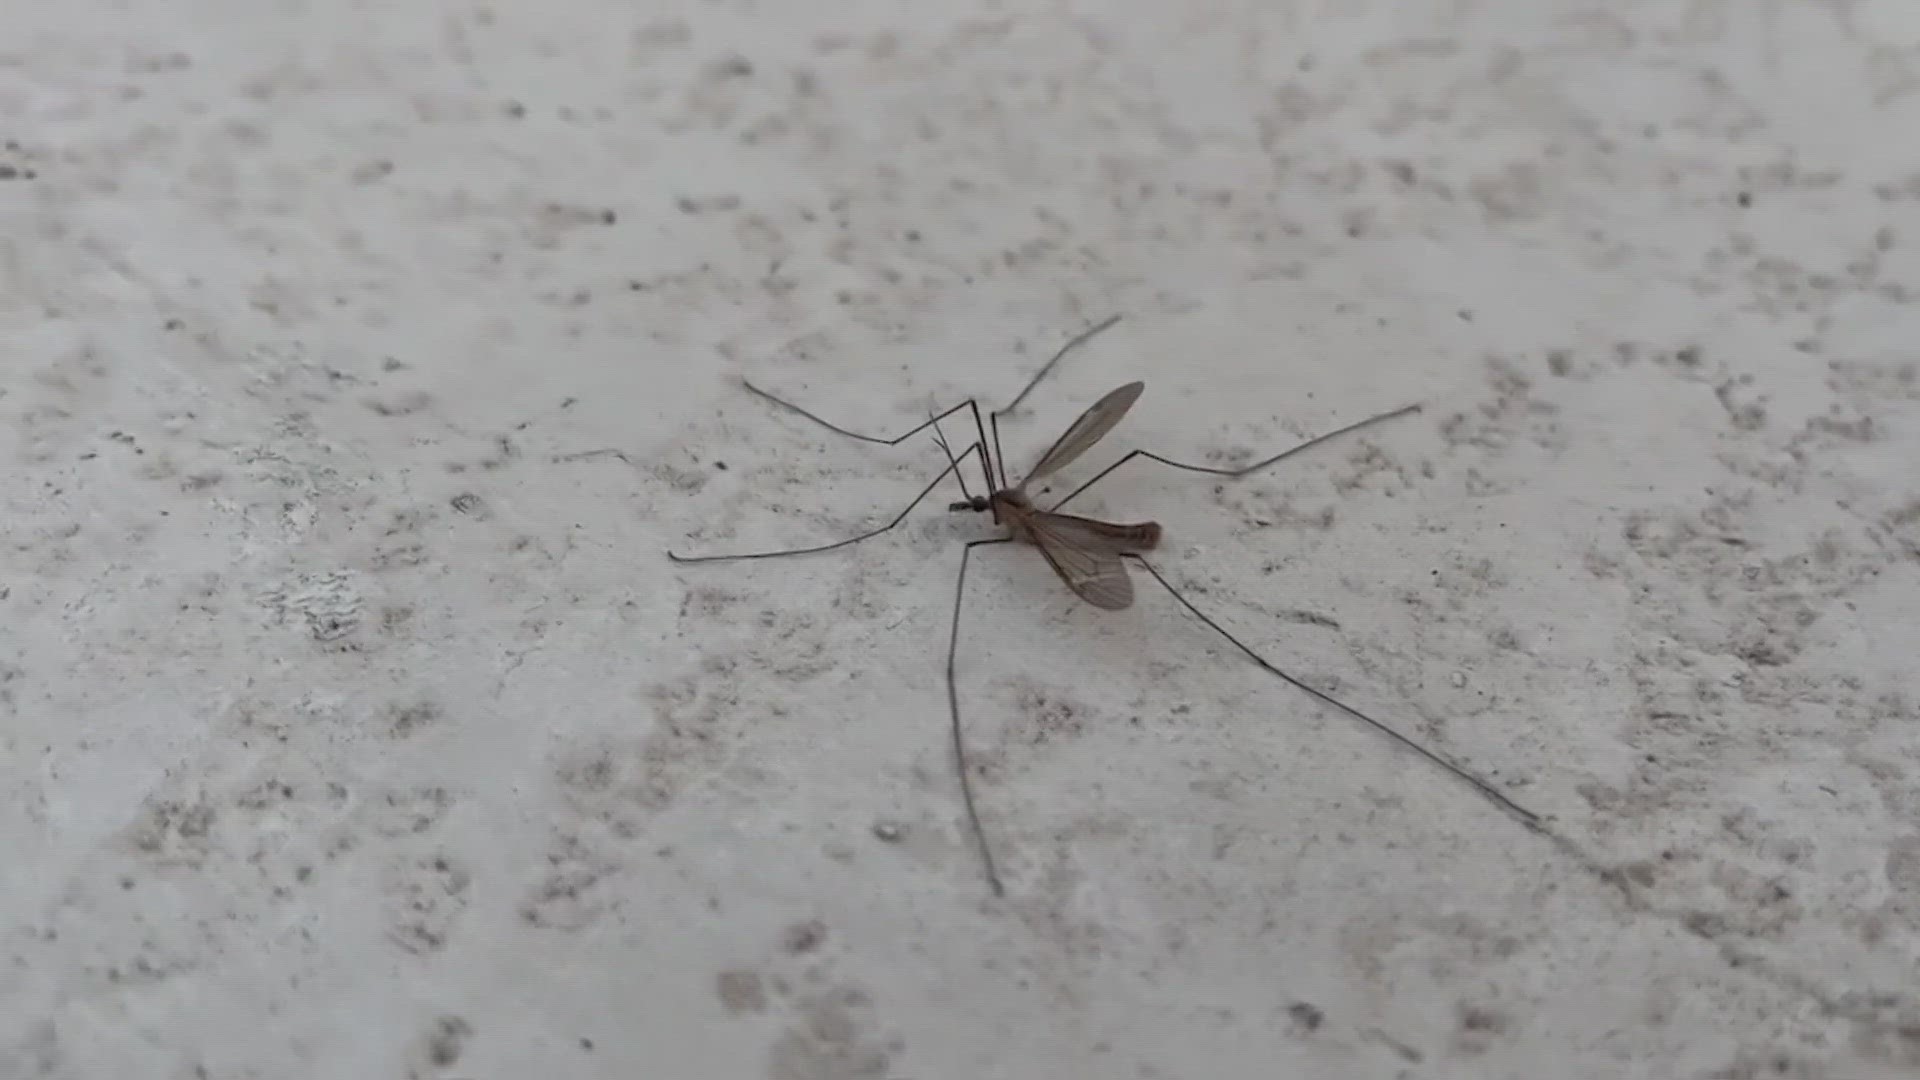 Experts say you should think twice before killing the the crane fly, an insect whose lifespan is roughly three days long.